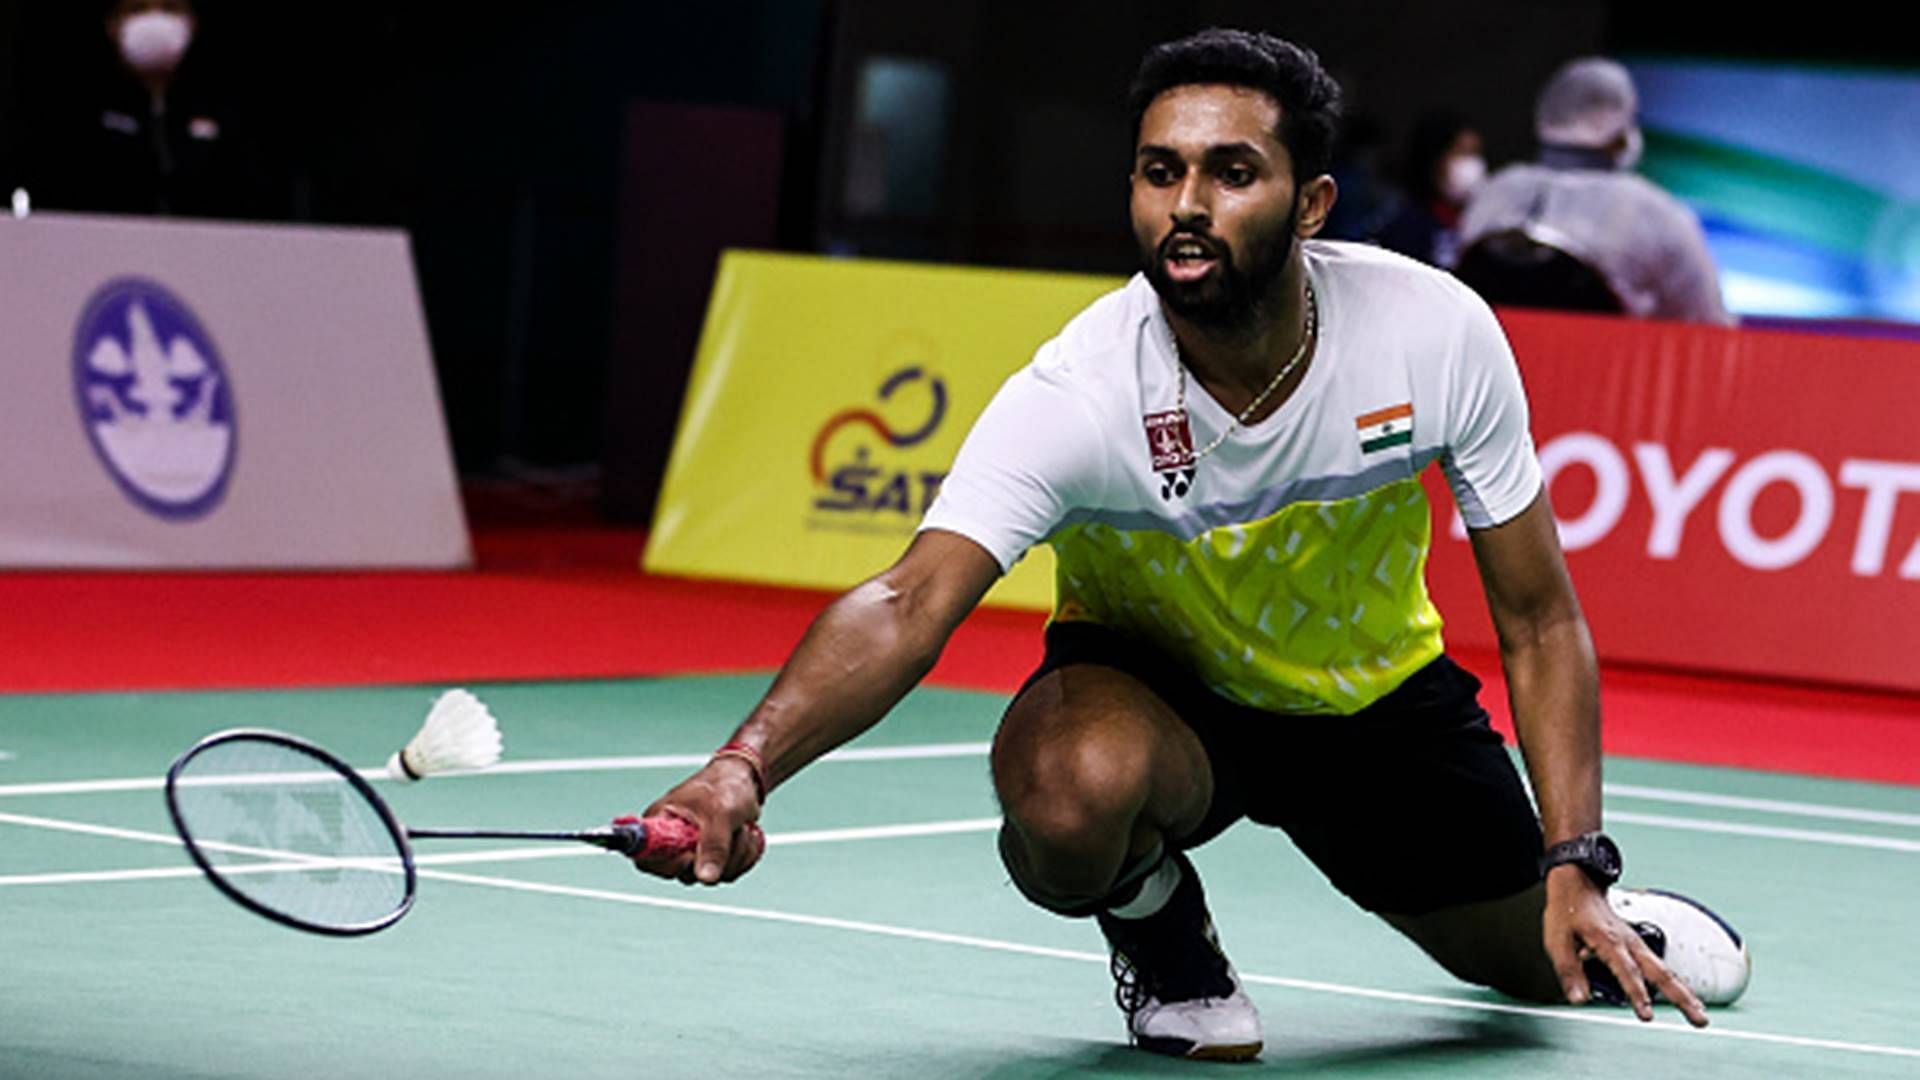 India was dealt tough card in the latest BWF World Rankings update